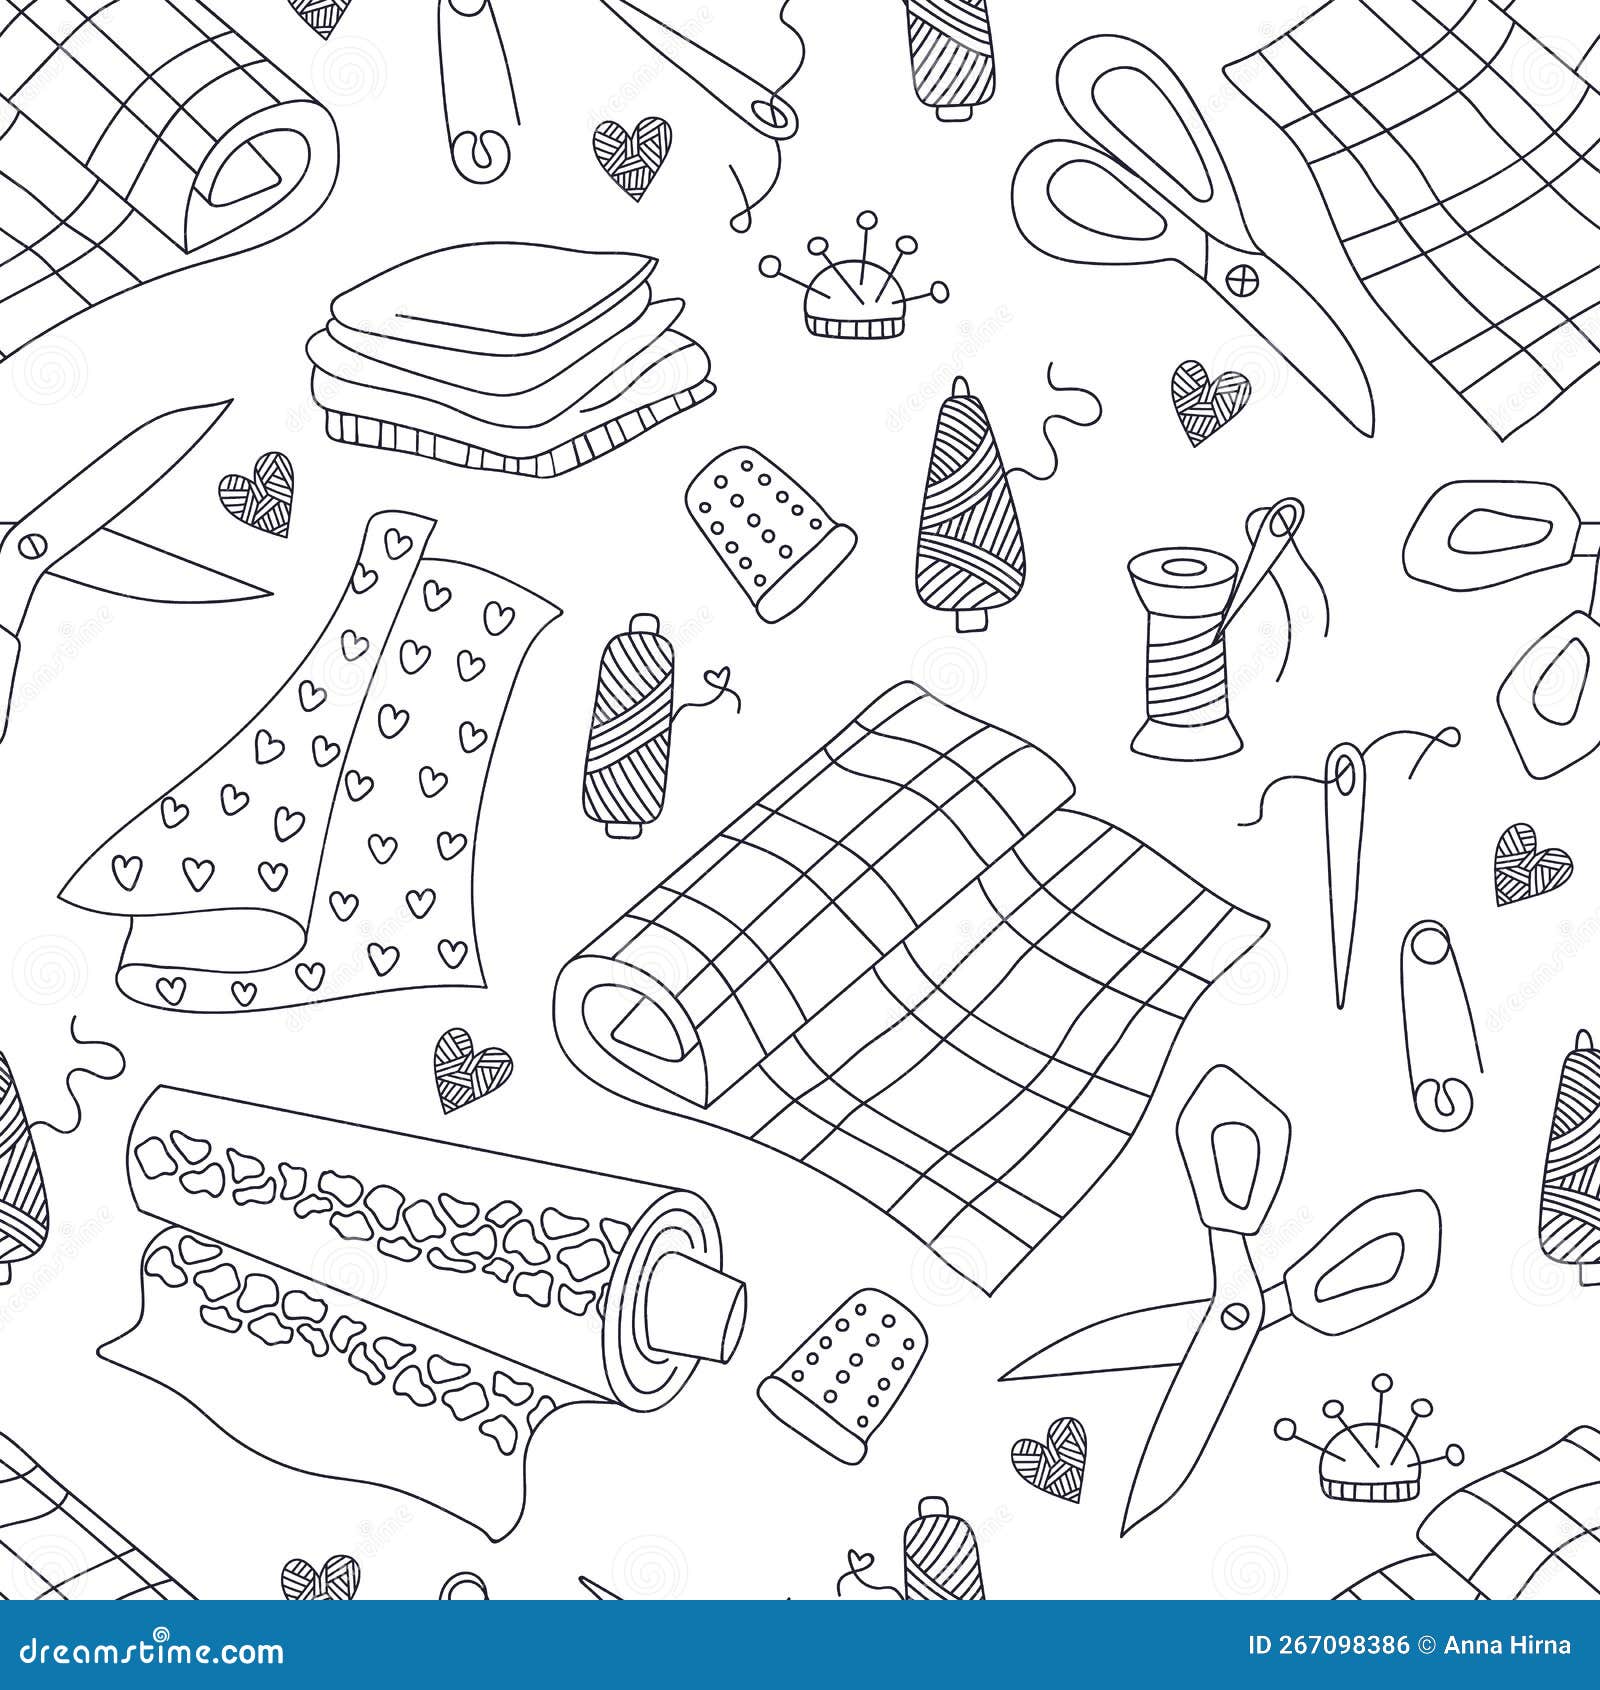 https://thumbs.dreamstime.com/z/sewing-tailor-elements-seamless-pattern-print-textile-wallpaper-covers-surface-fashion-fabric-retro-doodle-style-267098386.jpg